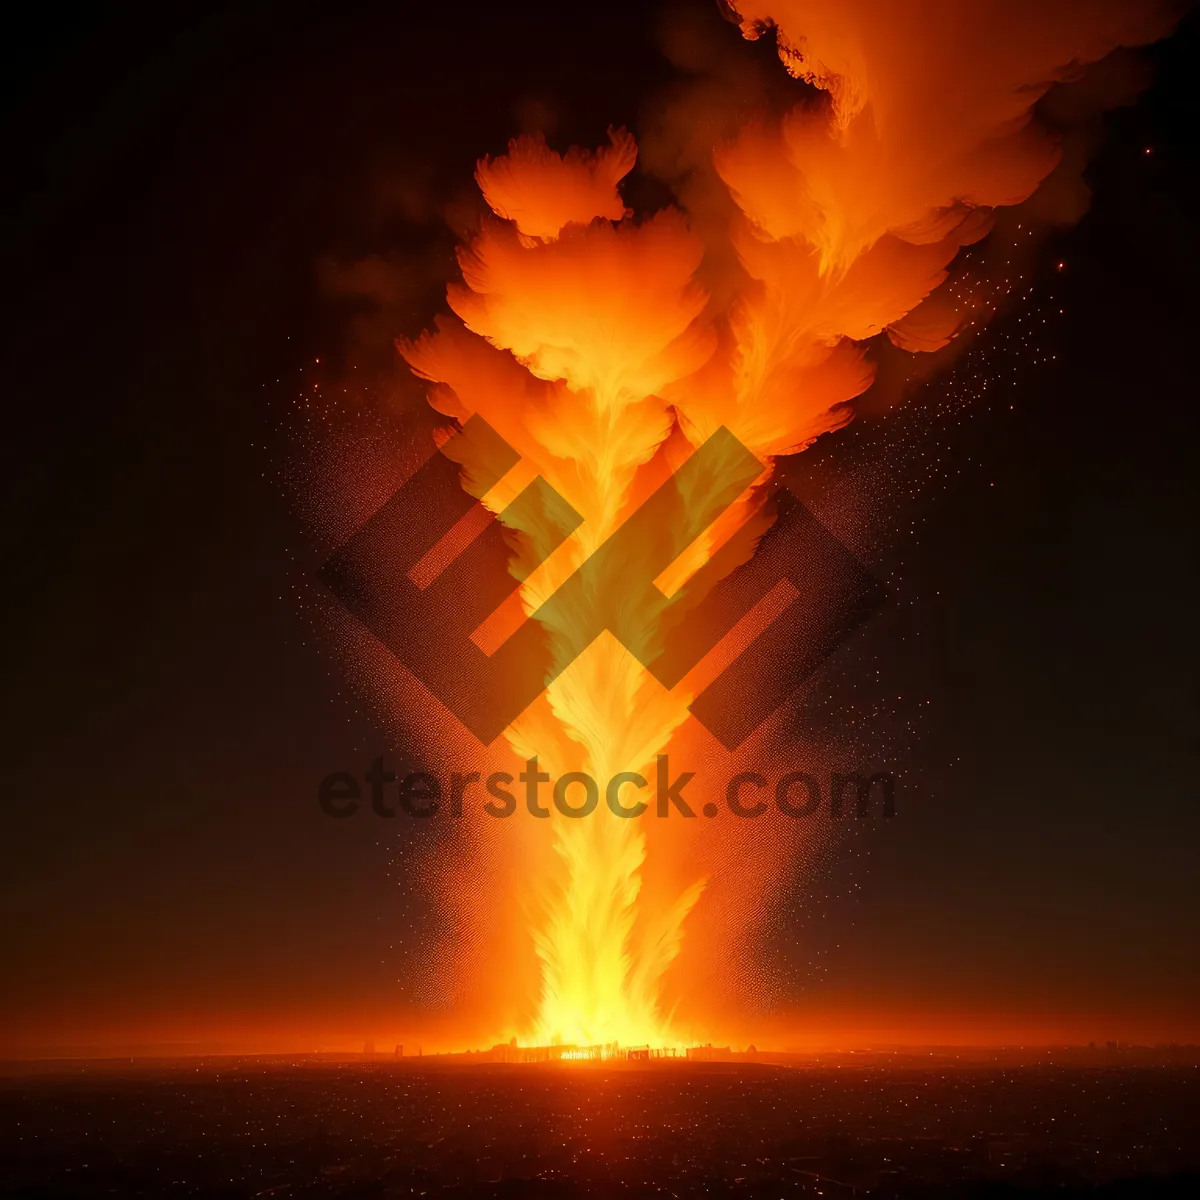 Picture of Blazing Inferno - Fiery Volcanic Mountain Eruption